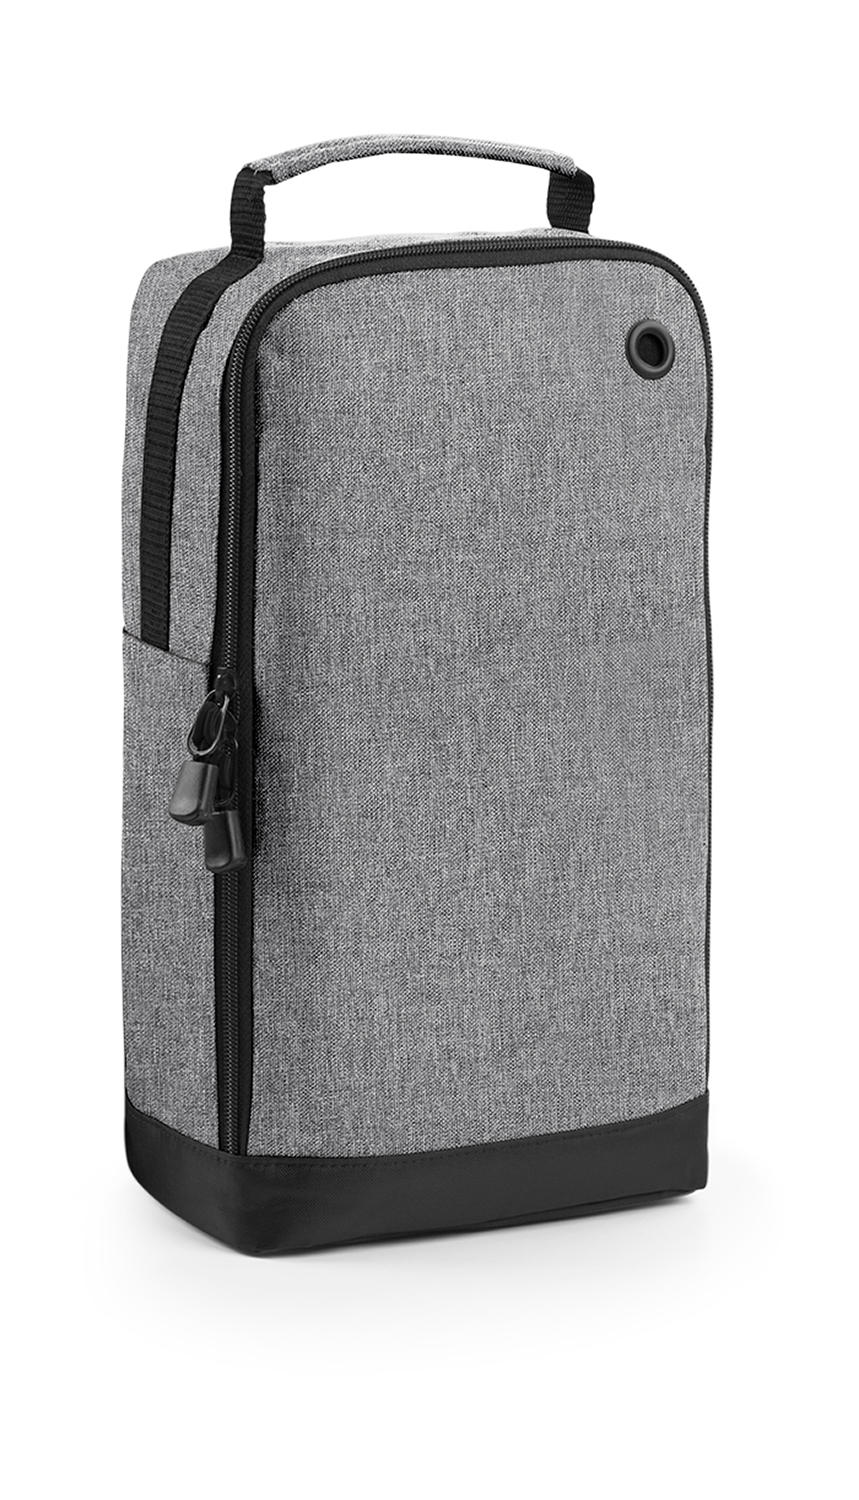  Sports Shoe/Accessory Bag in Farbe Grey Marl